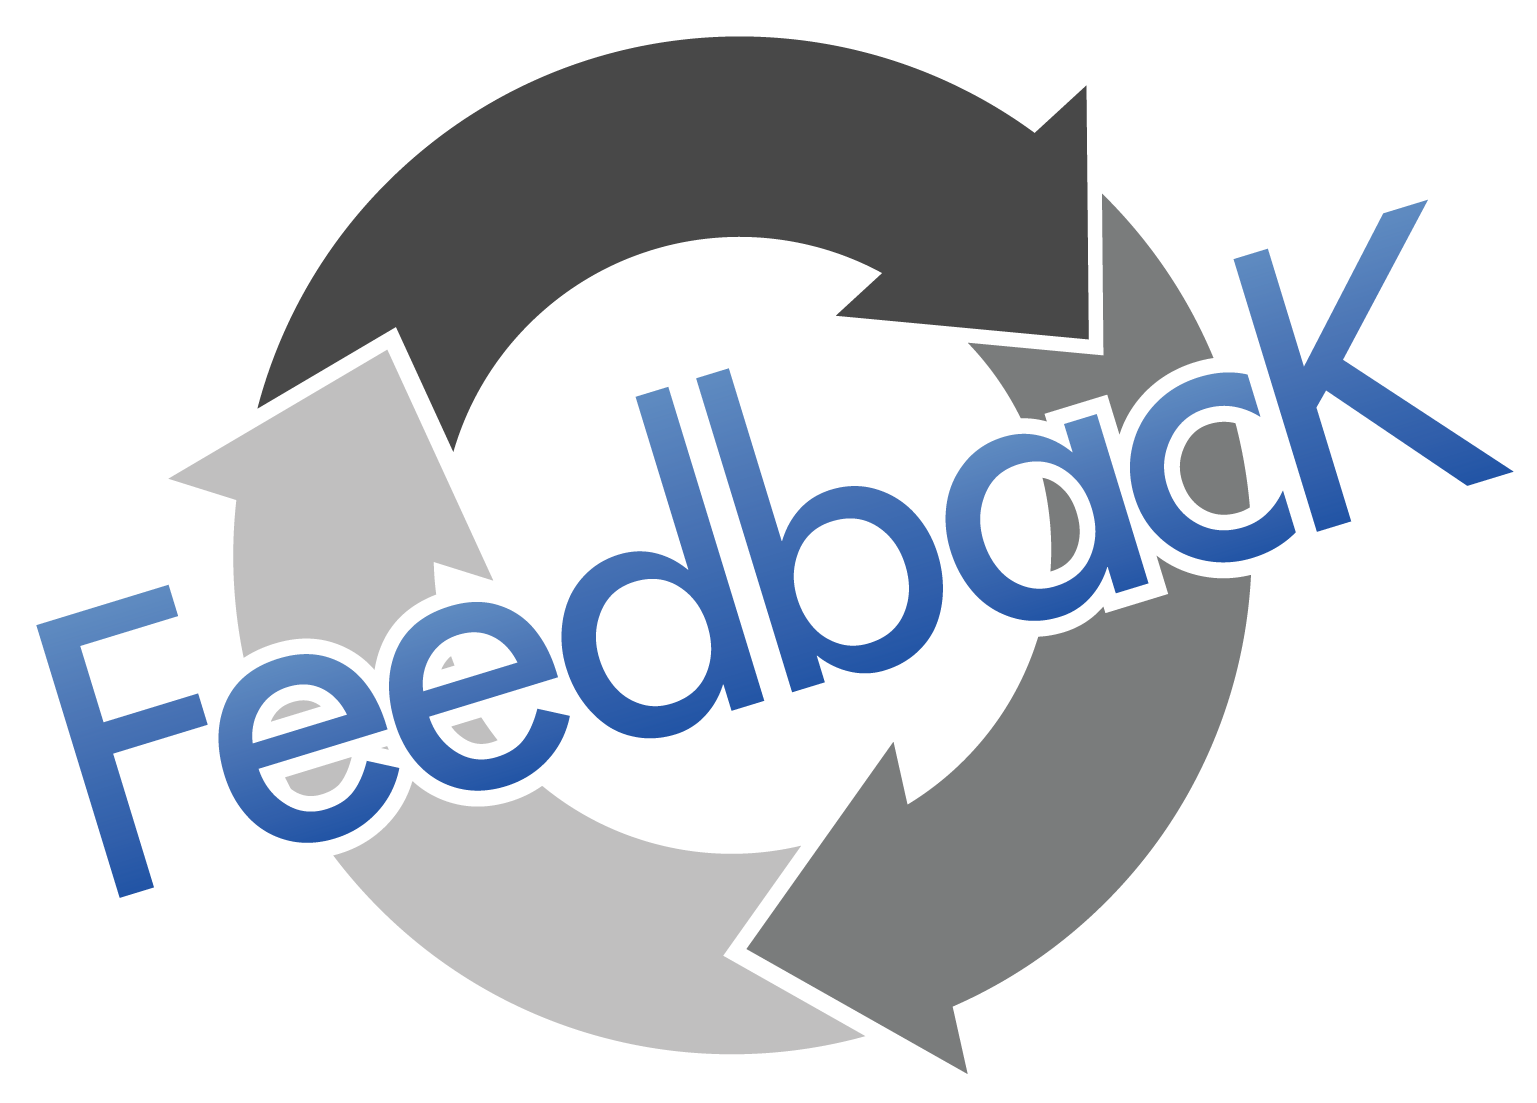 Free Feedback Icon Png, Download Free Clip Art, Free Clip.